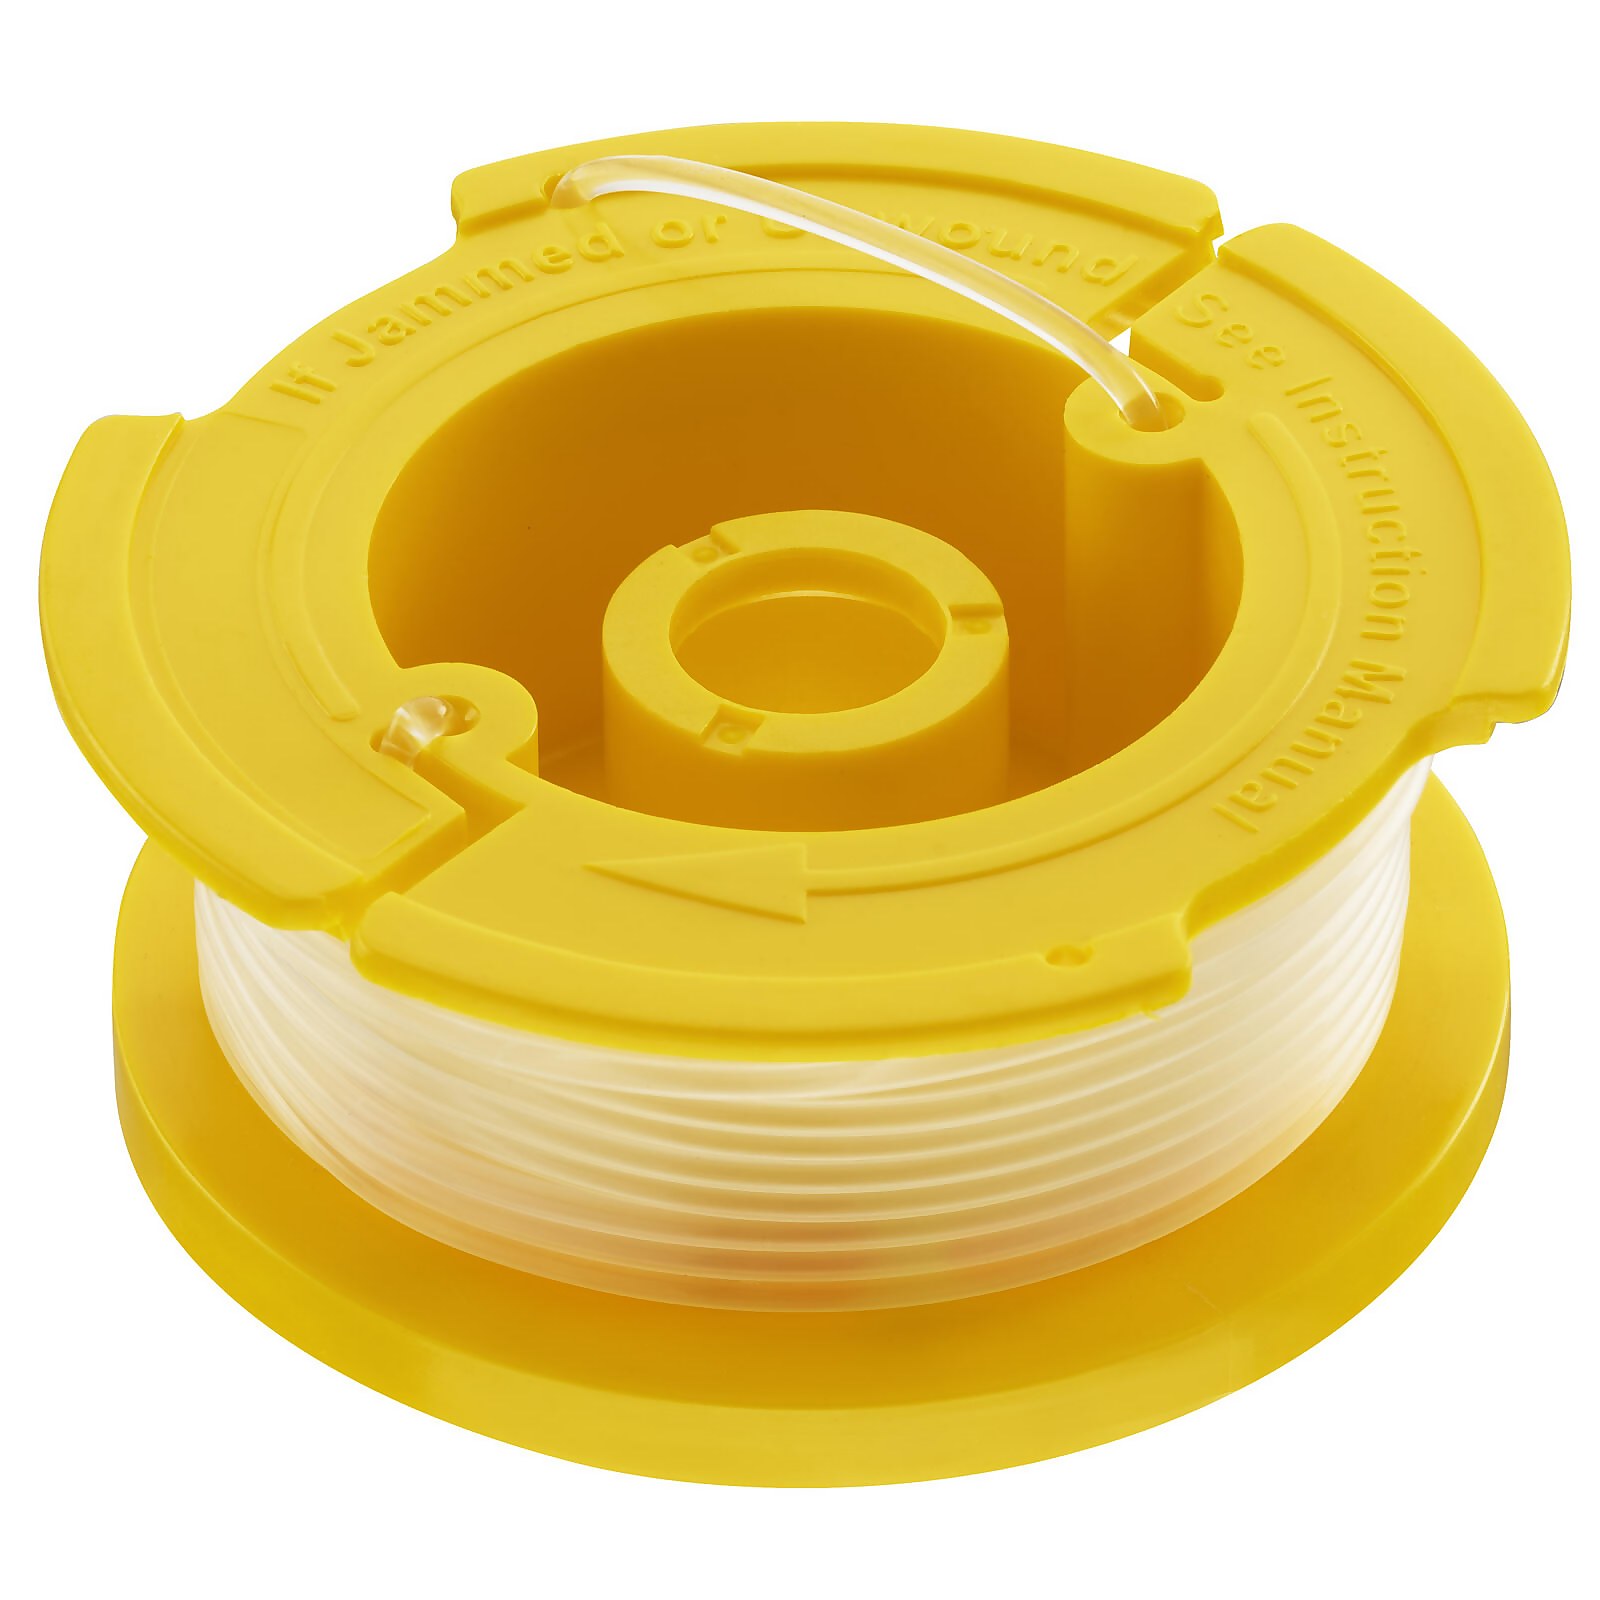 Photo of Stanley Fatmax Spool And Line For Grass Trimmer